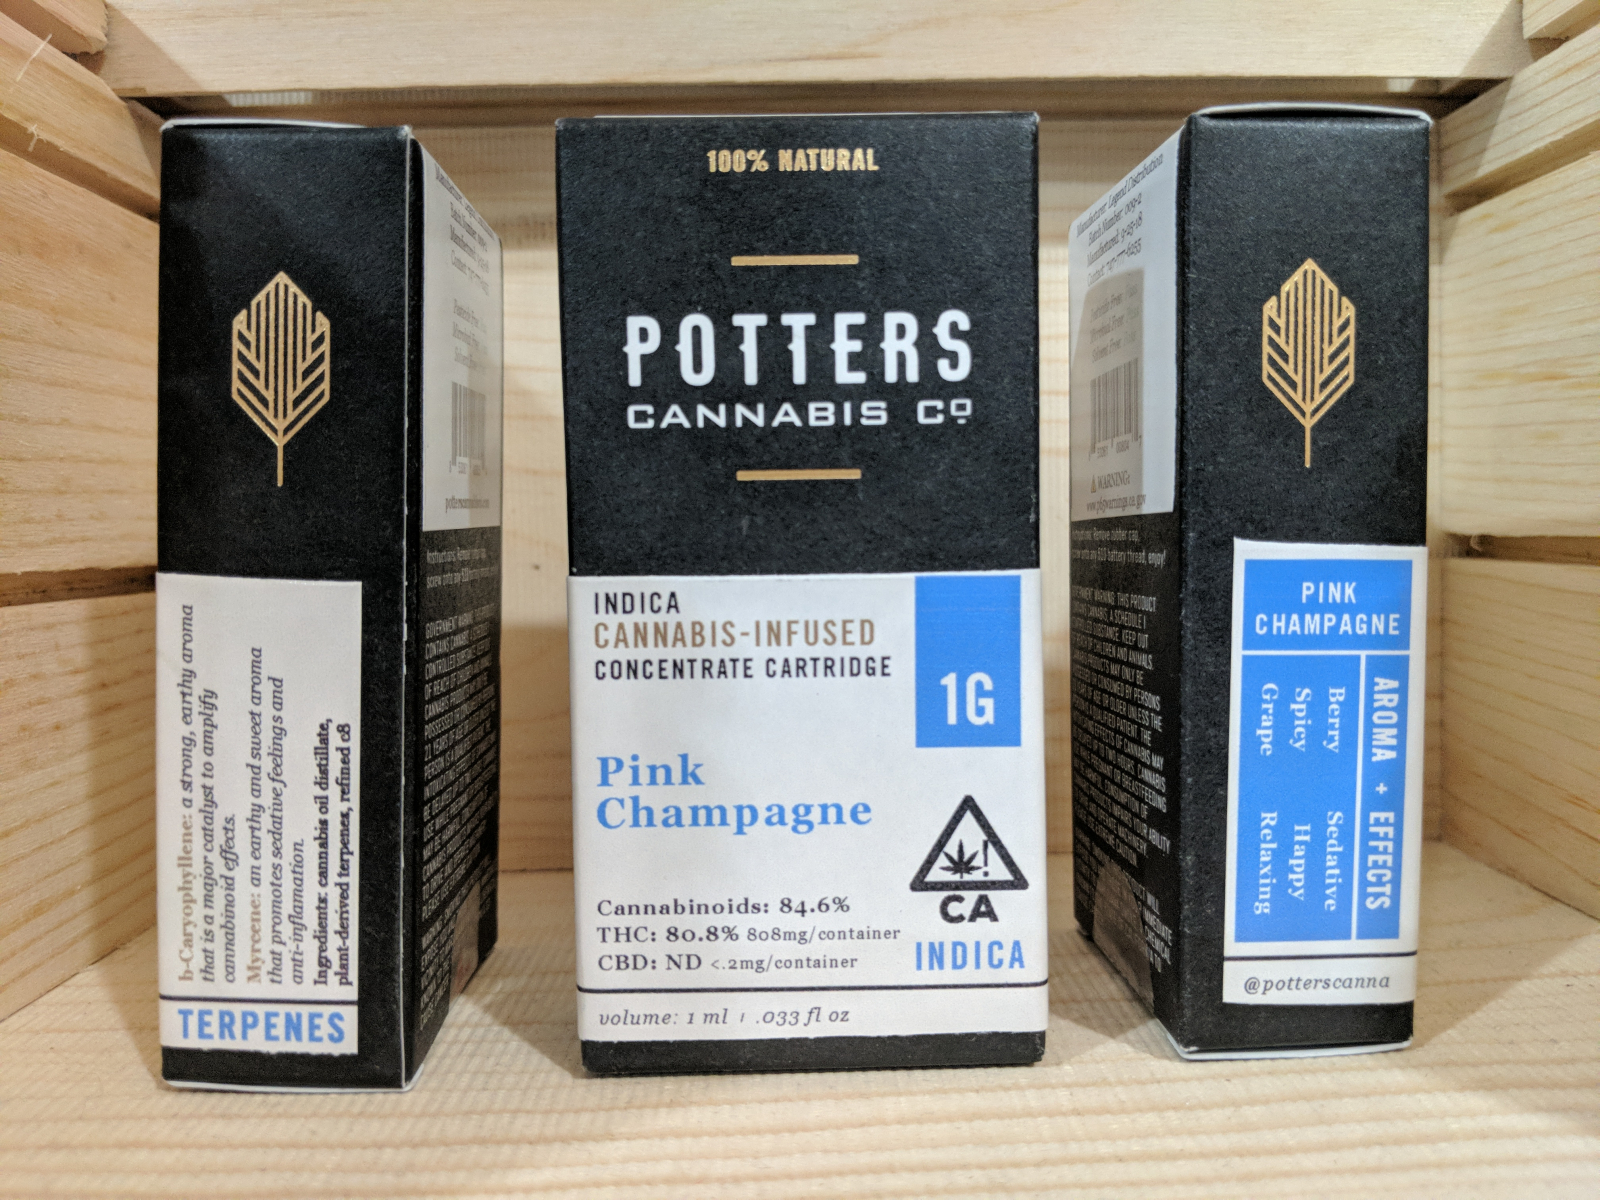 Potters one gram pink champagne cartridge